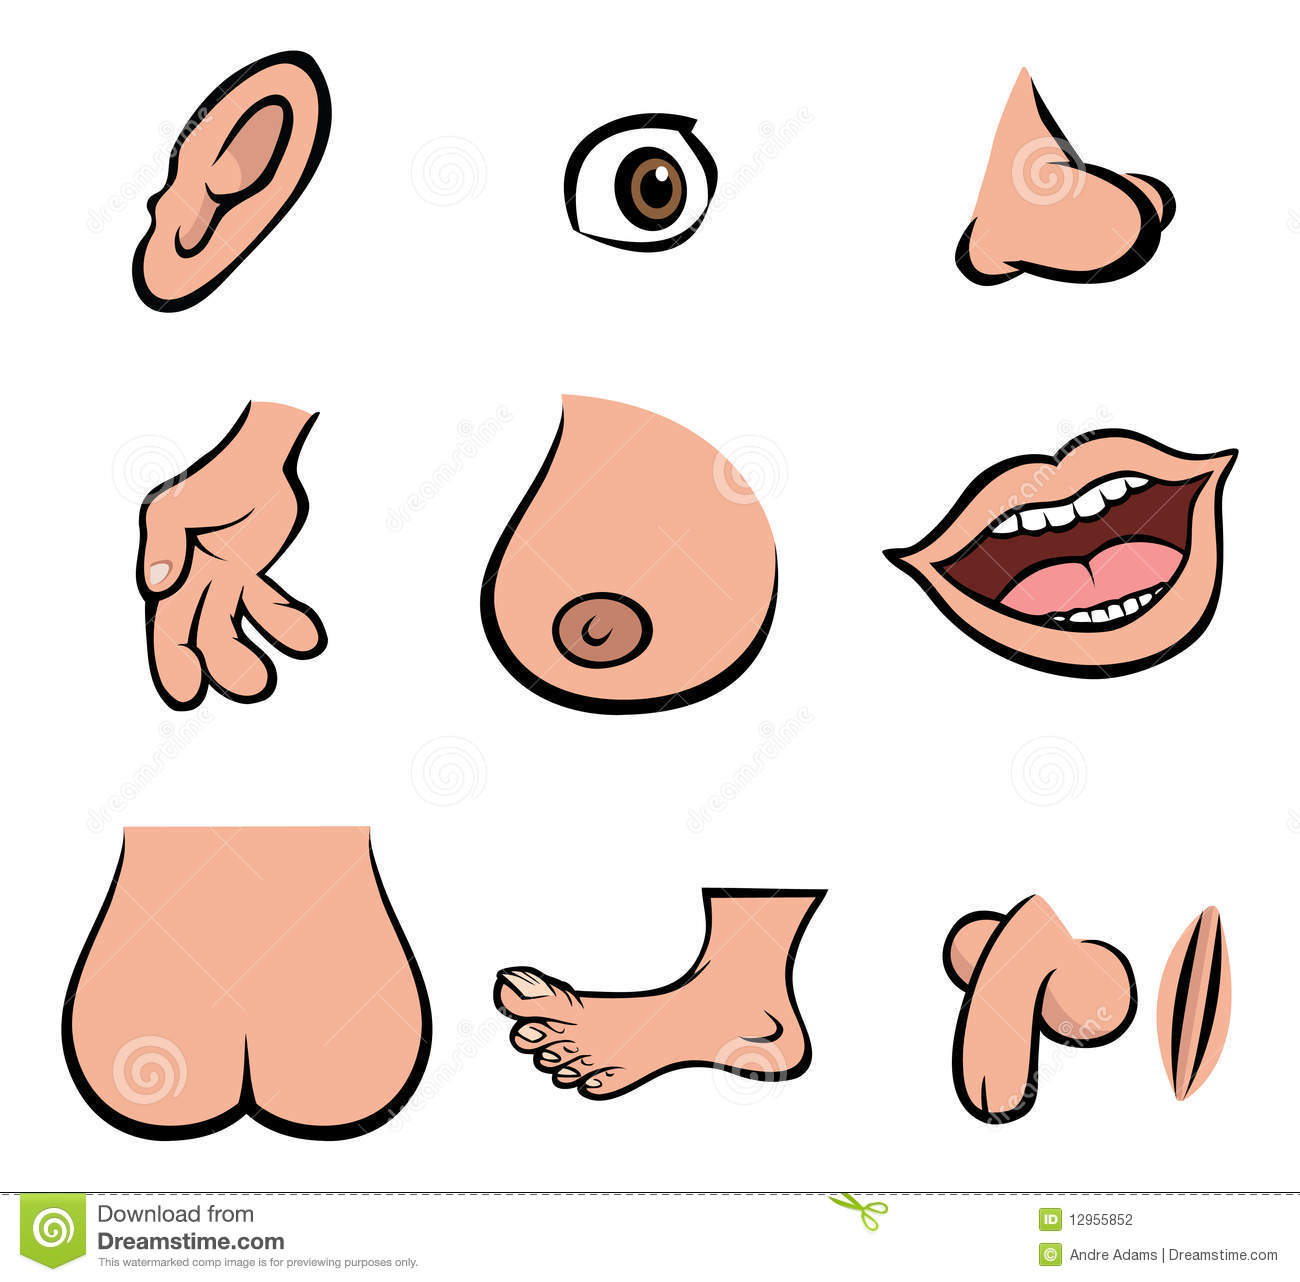 Body parts clipart - Clipground